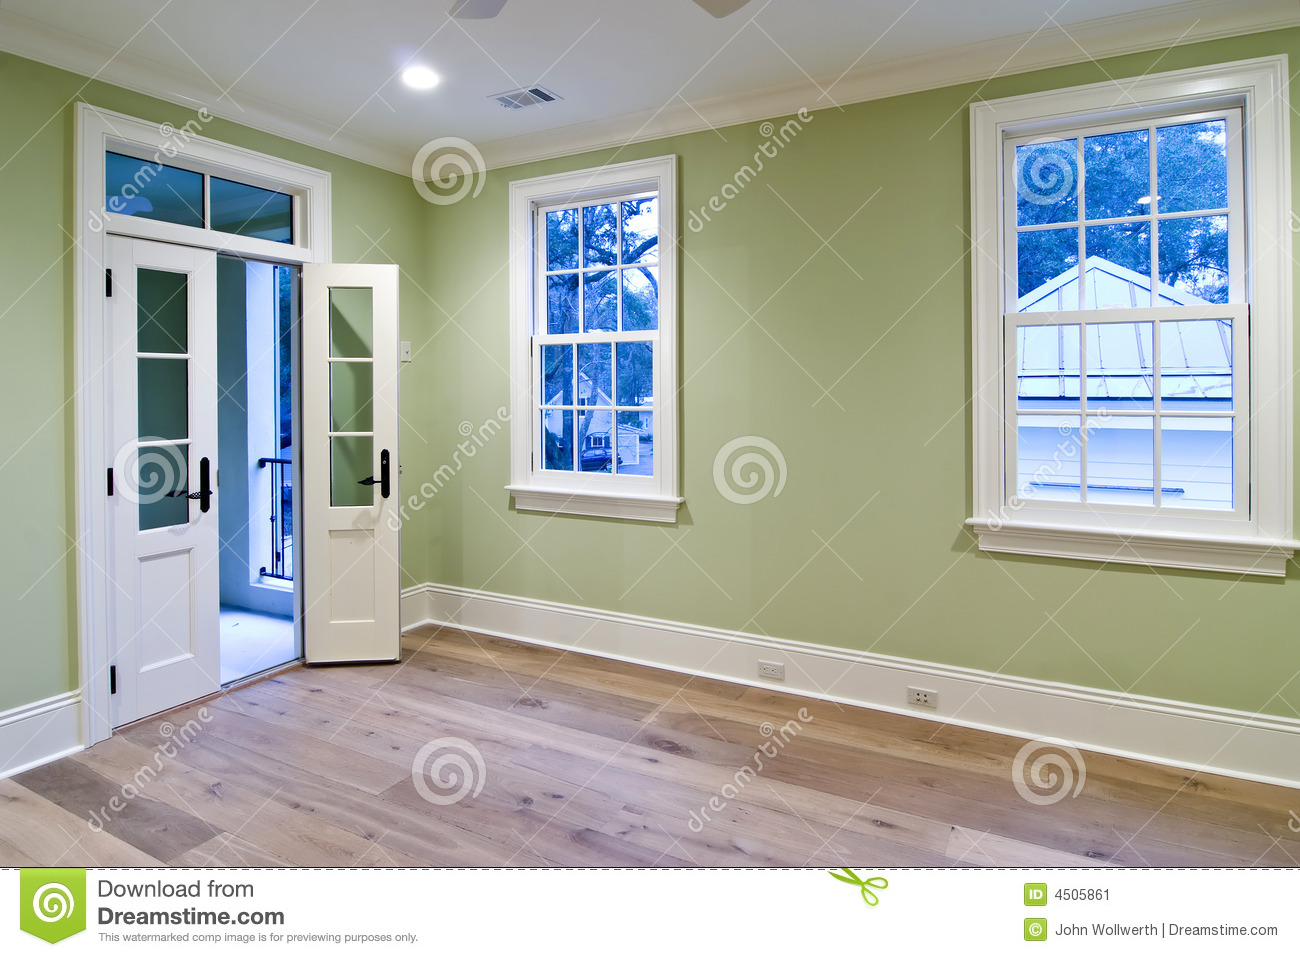 Unfurnished Bedroom With Porch Stock Image   Image  4505861